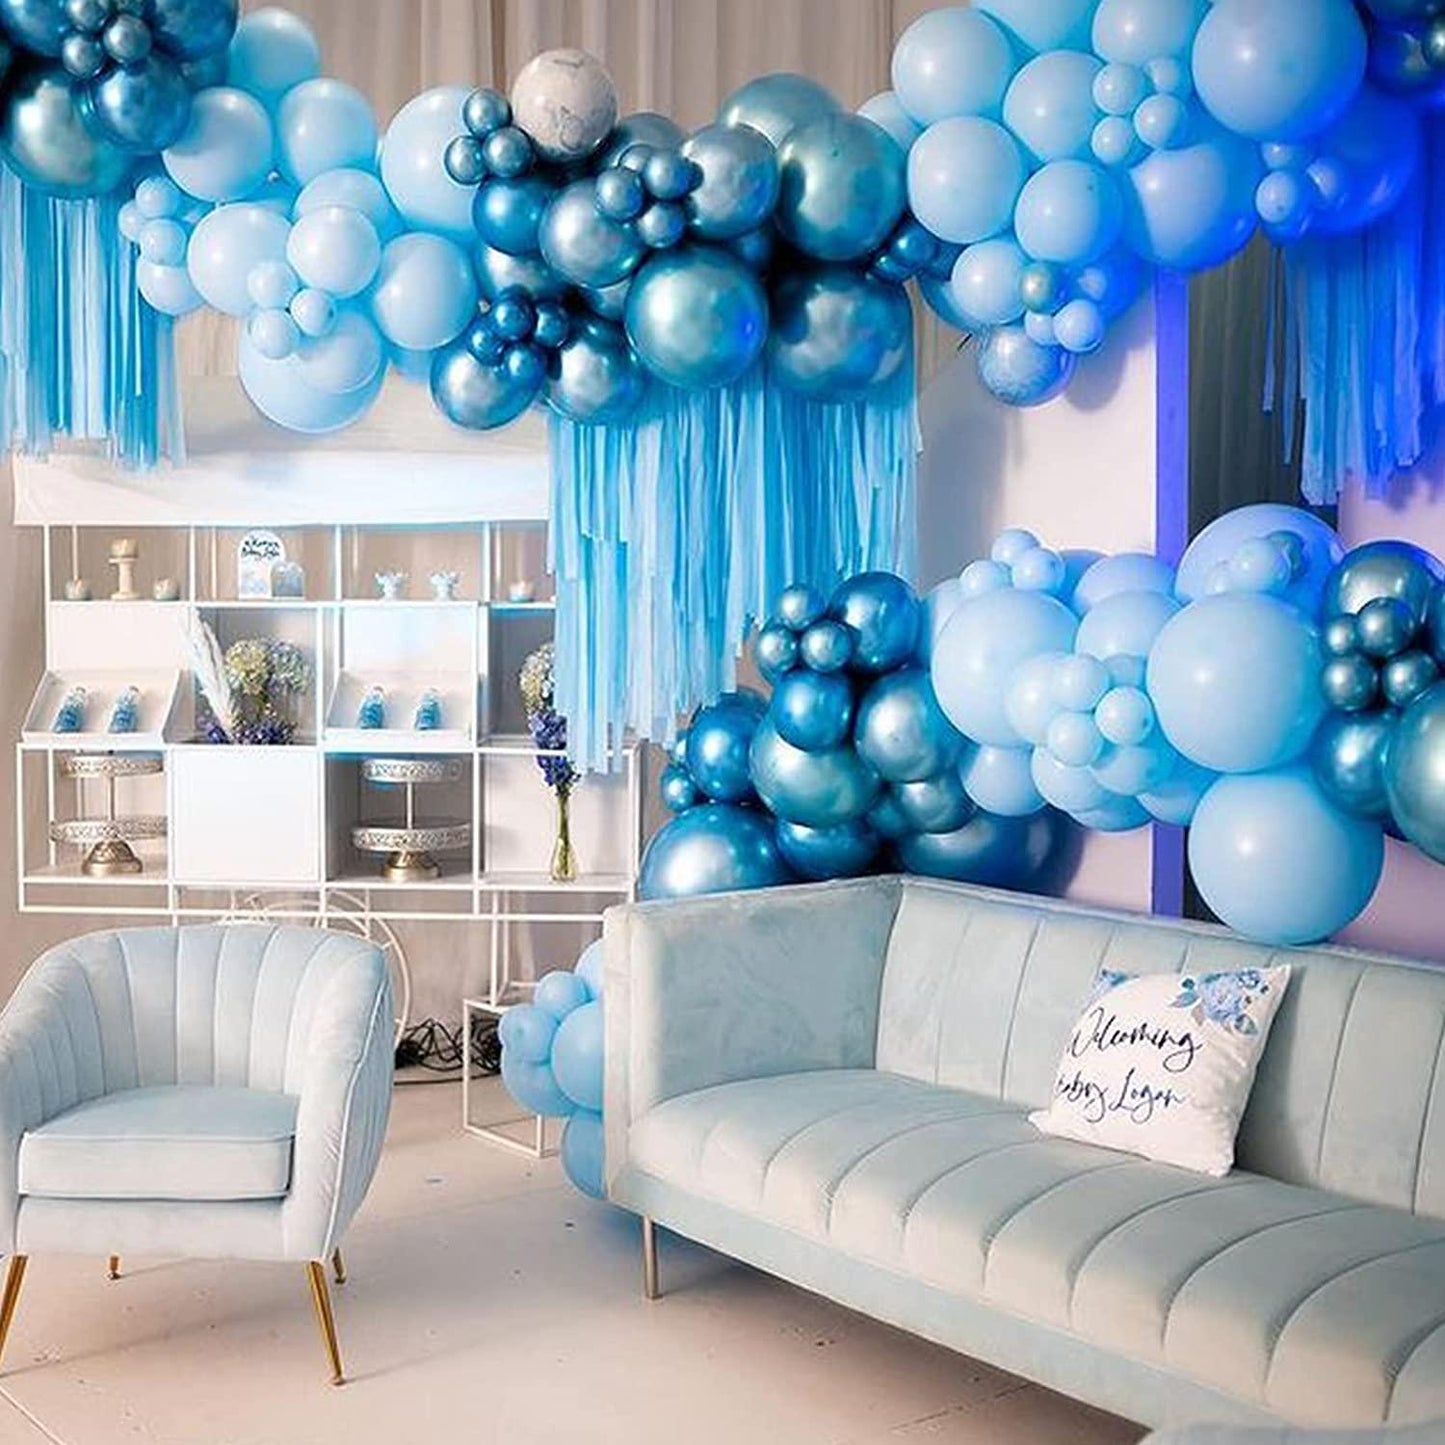 174Pcs Boy's Birthday Different Blue Macaron Size Balloons Garland Kit Dark and Baby Blue Chrome White Balloons for Baby Shower - If you say i do